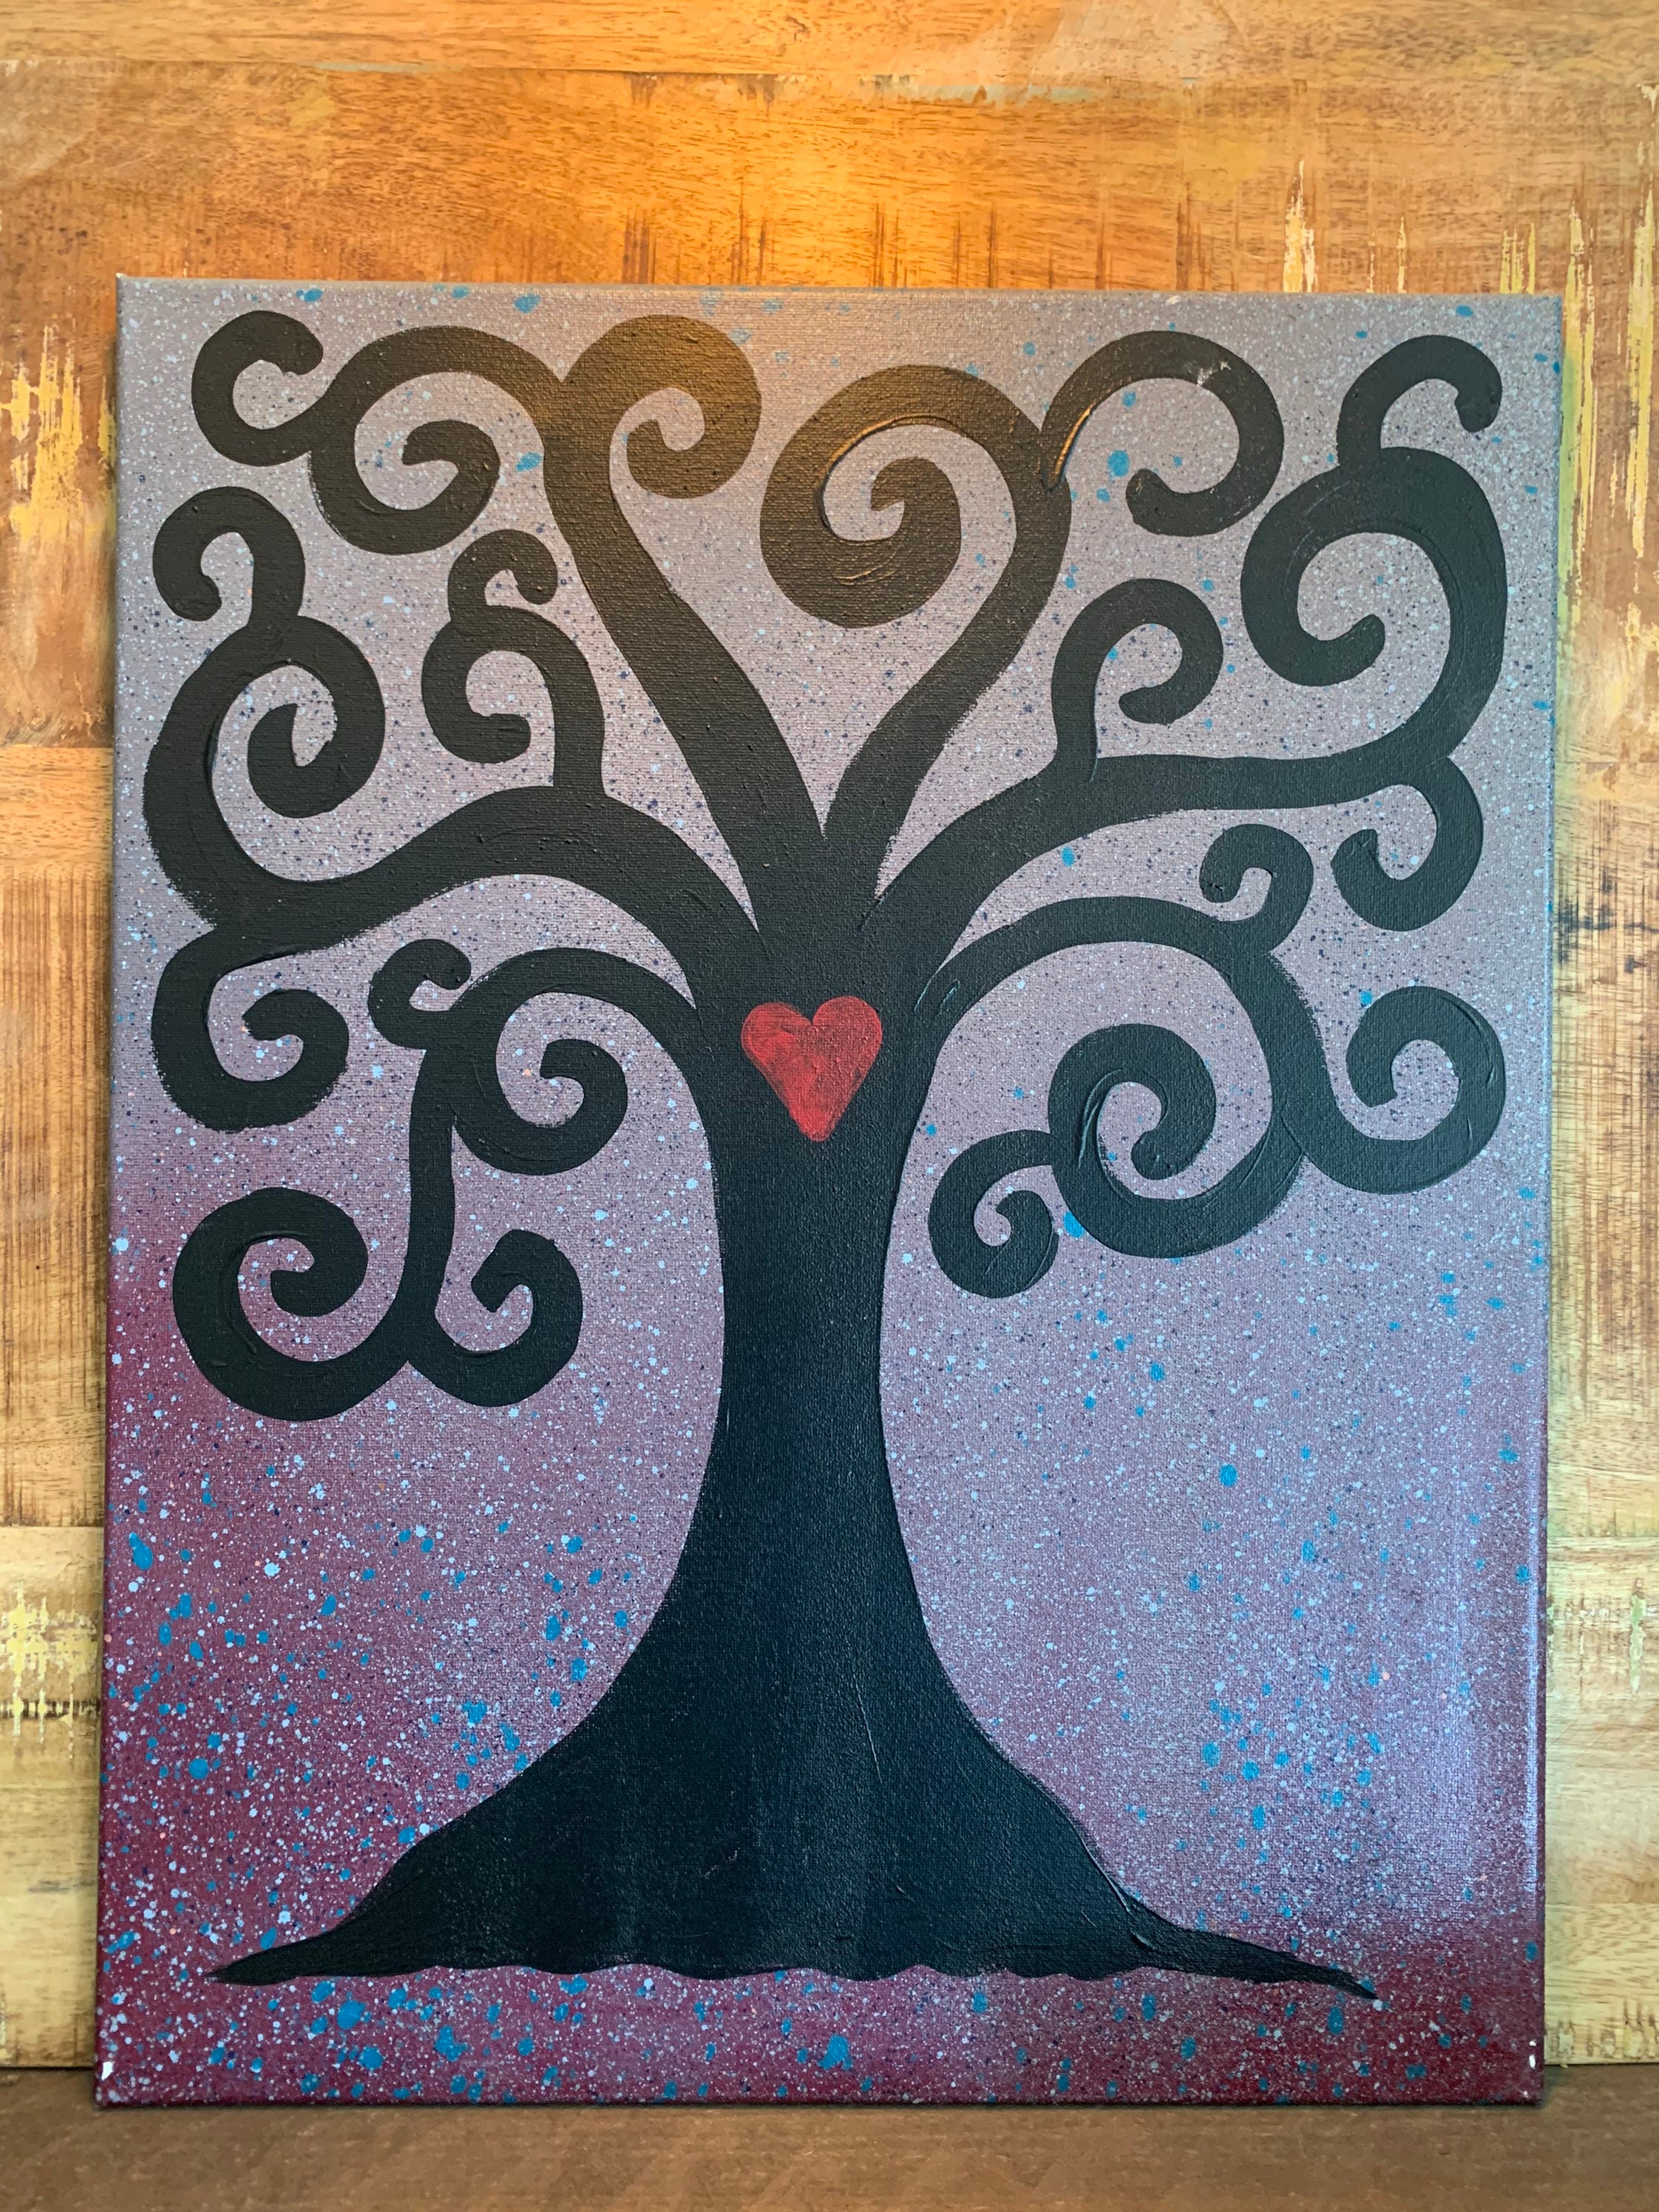 Personalized Our Family Tree 16 x 20 Canvas Available In Multiple Colors